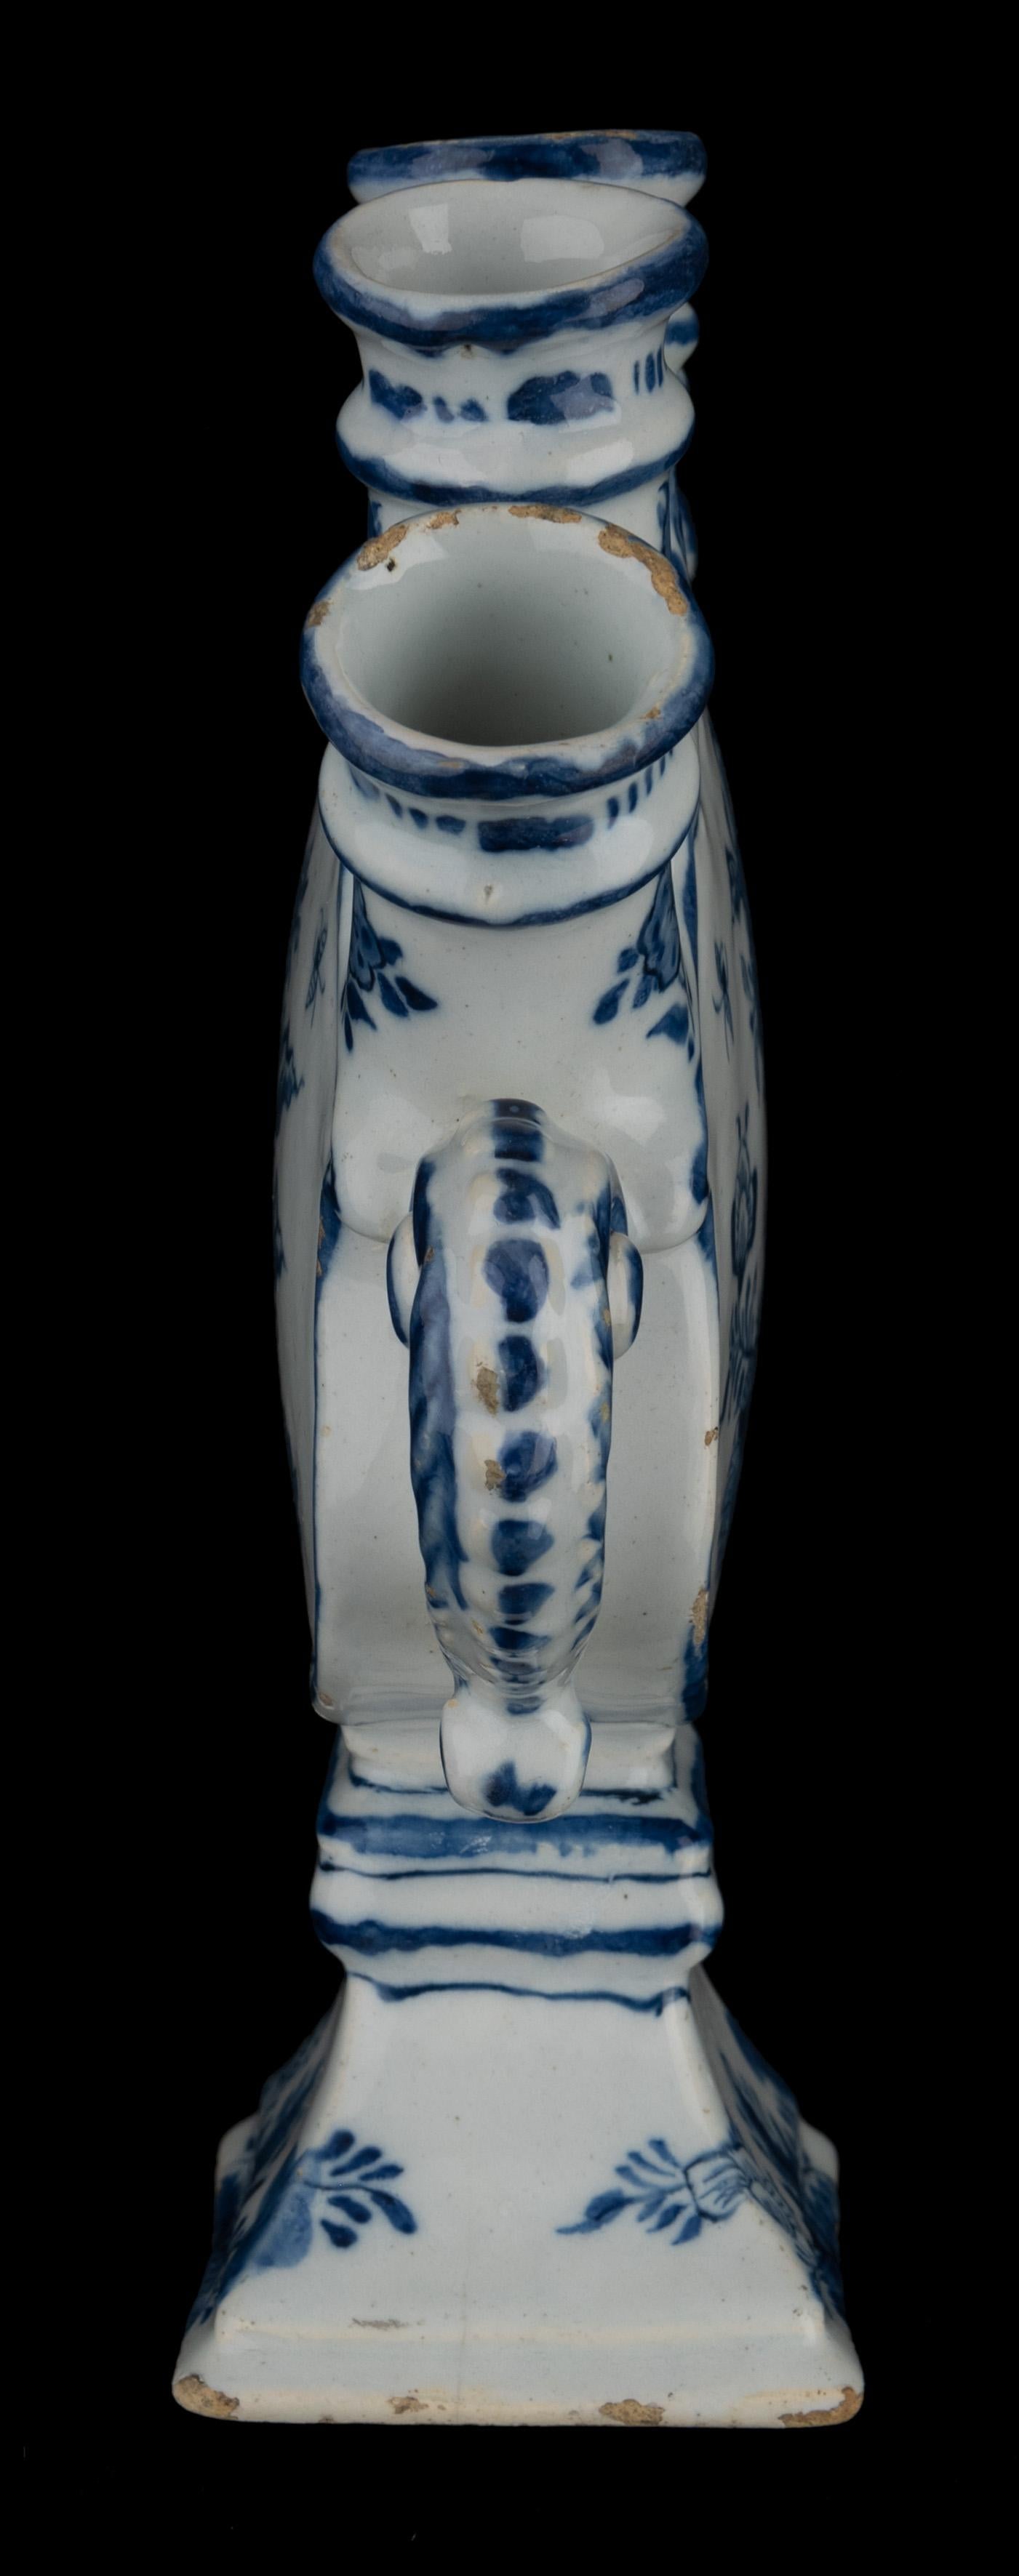 Glazed Delft Blue and White Flower Vase with Spouts 1720-1730 Tulip Vase For Sale